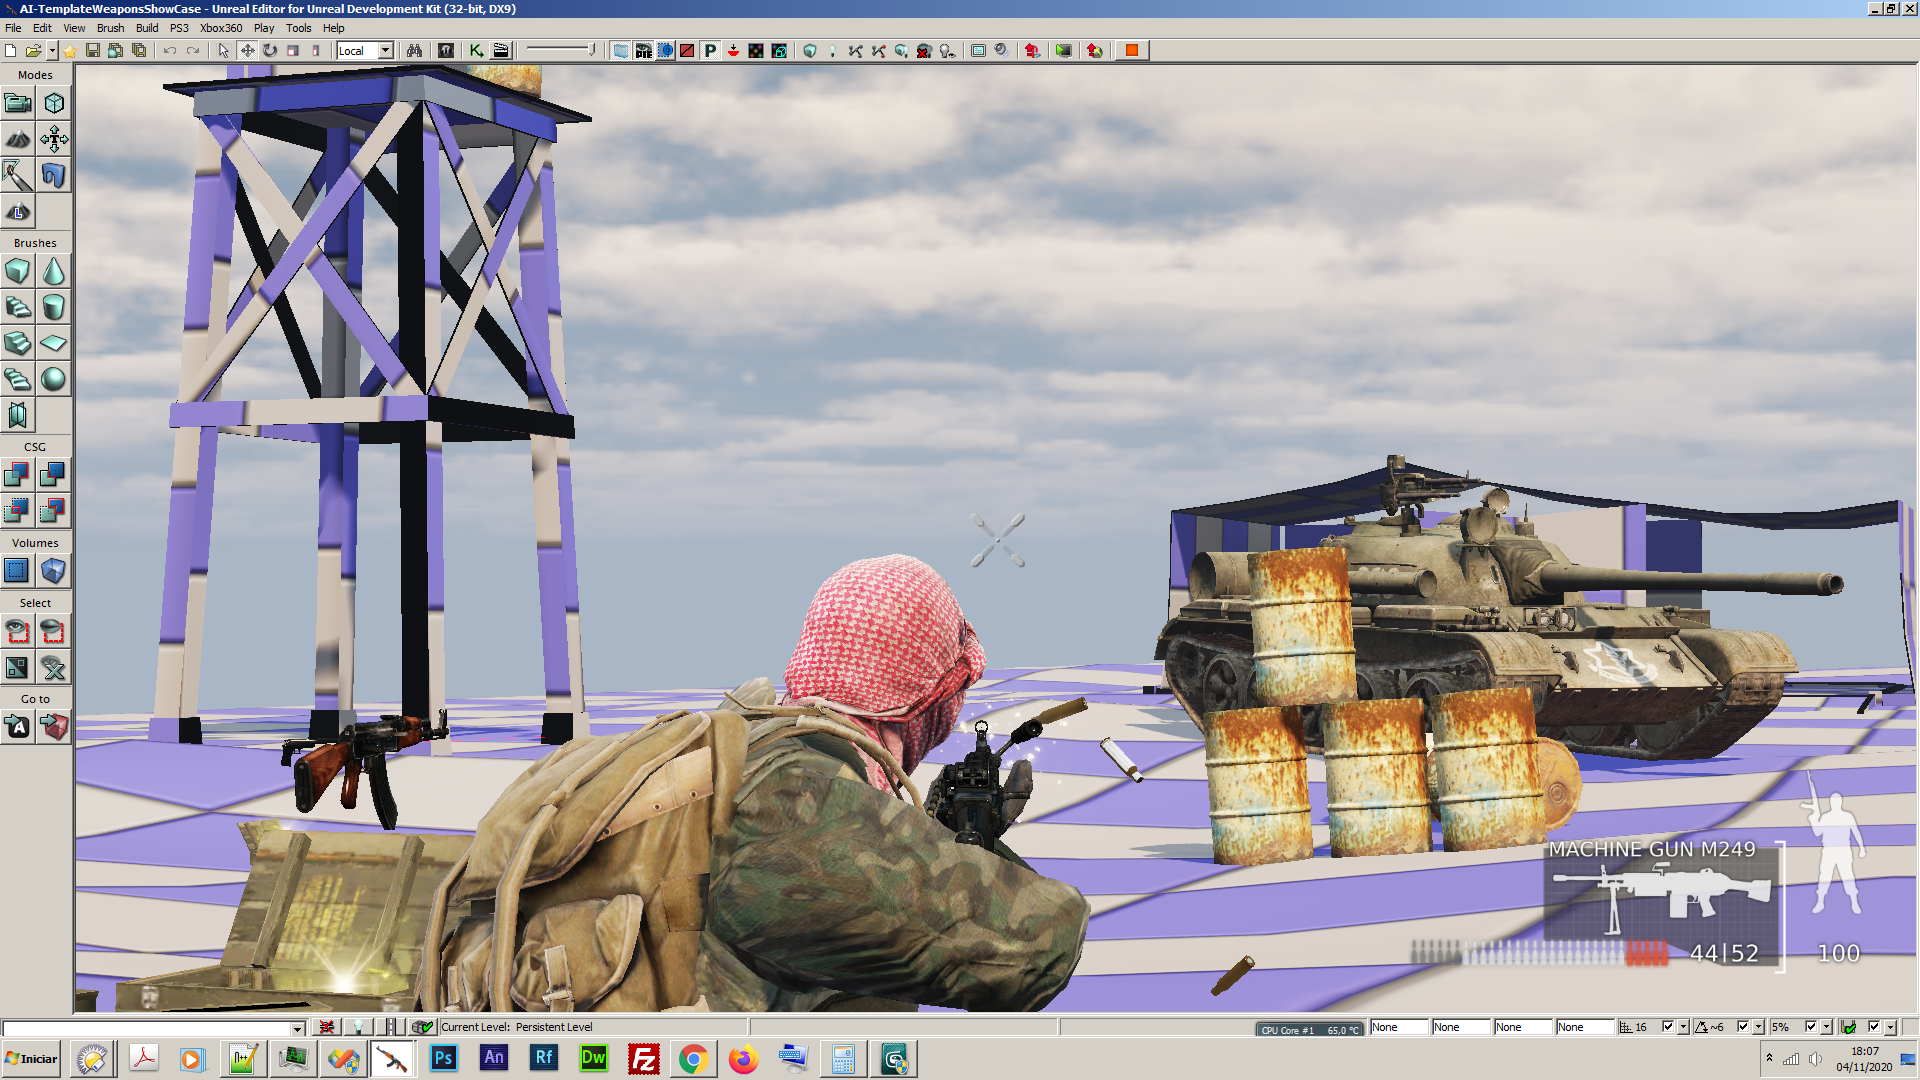 M249 3 1 - I am developing a game about Palestine Resistance